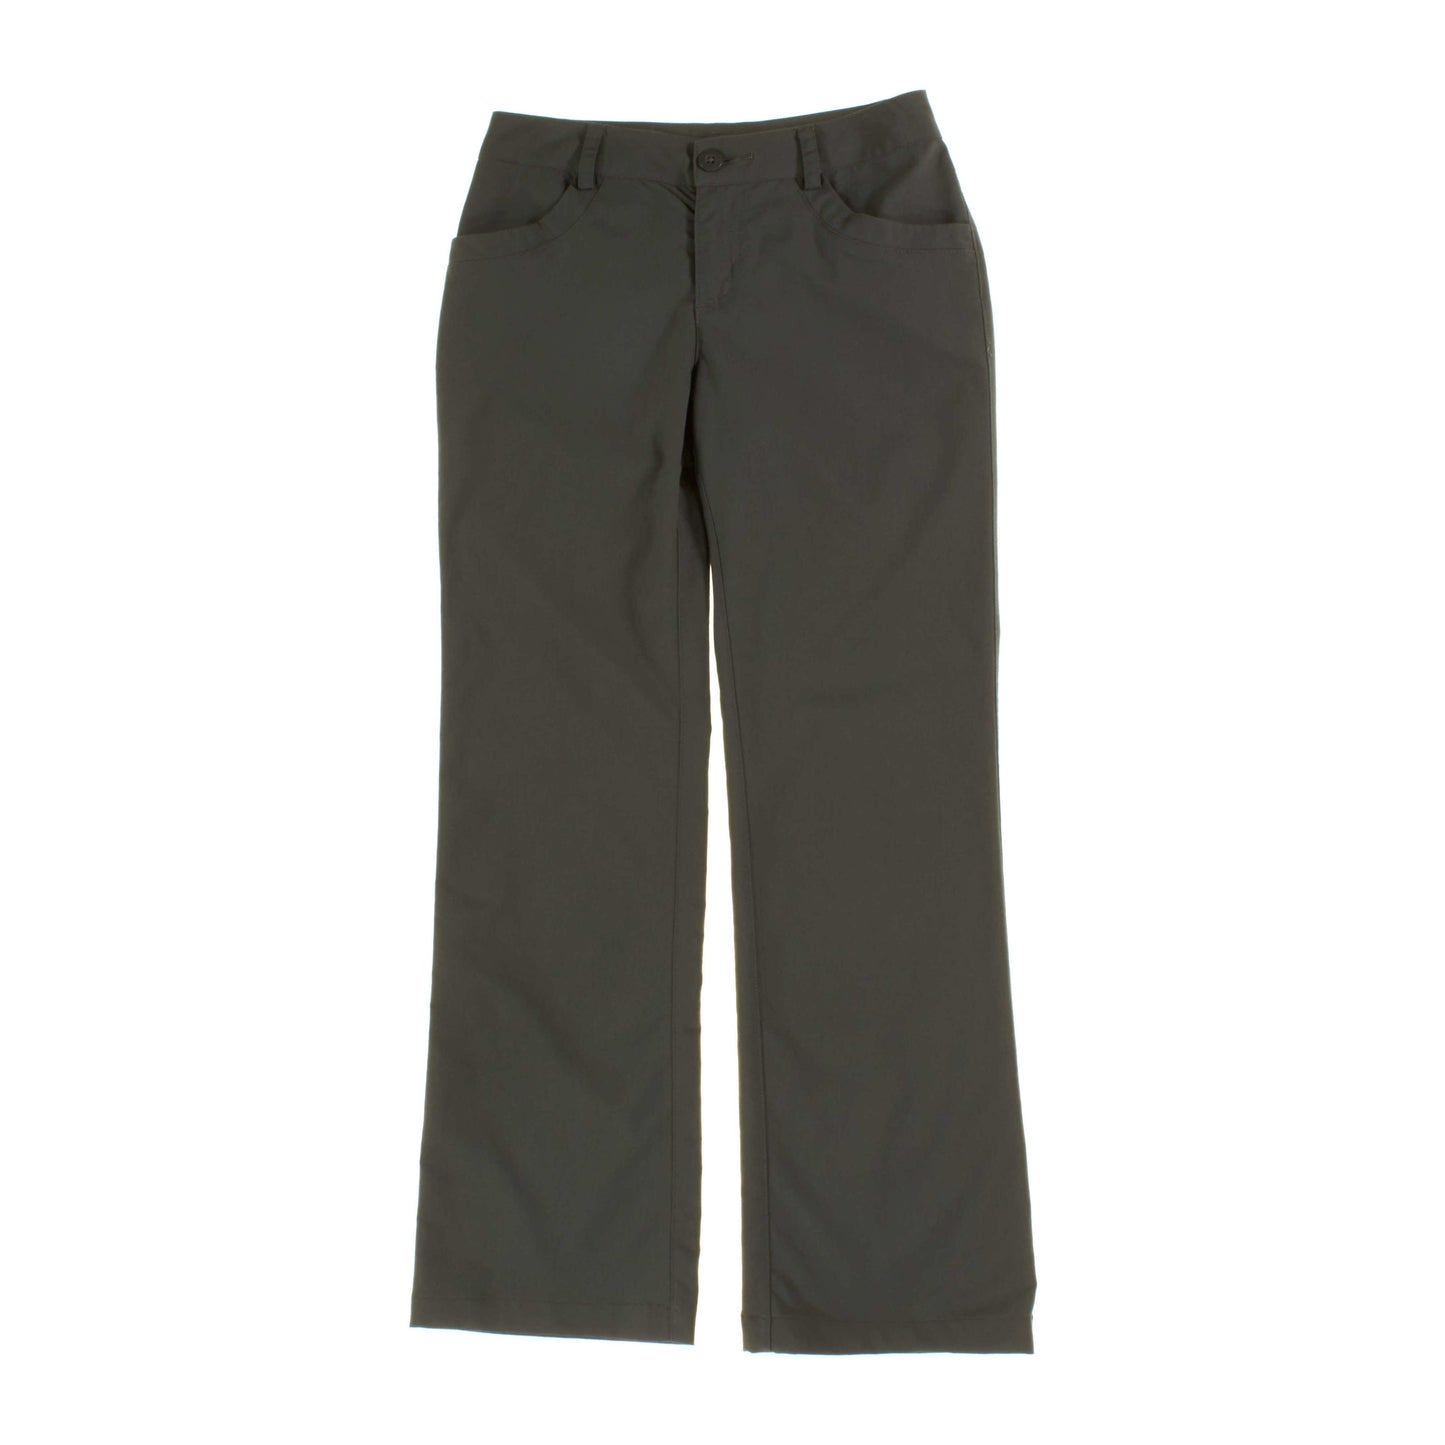 W's River Valley Pants